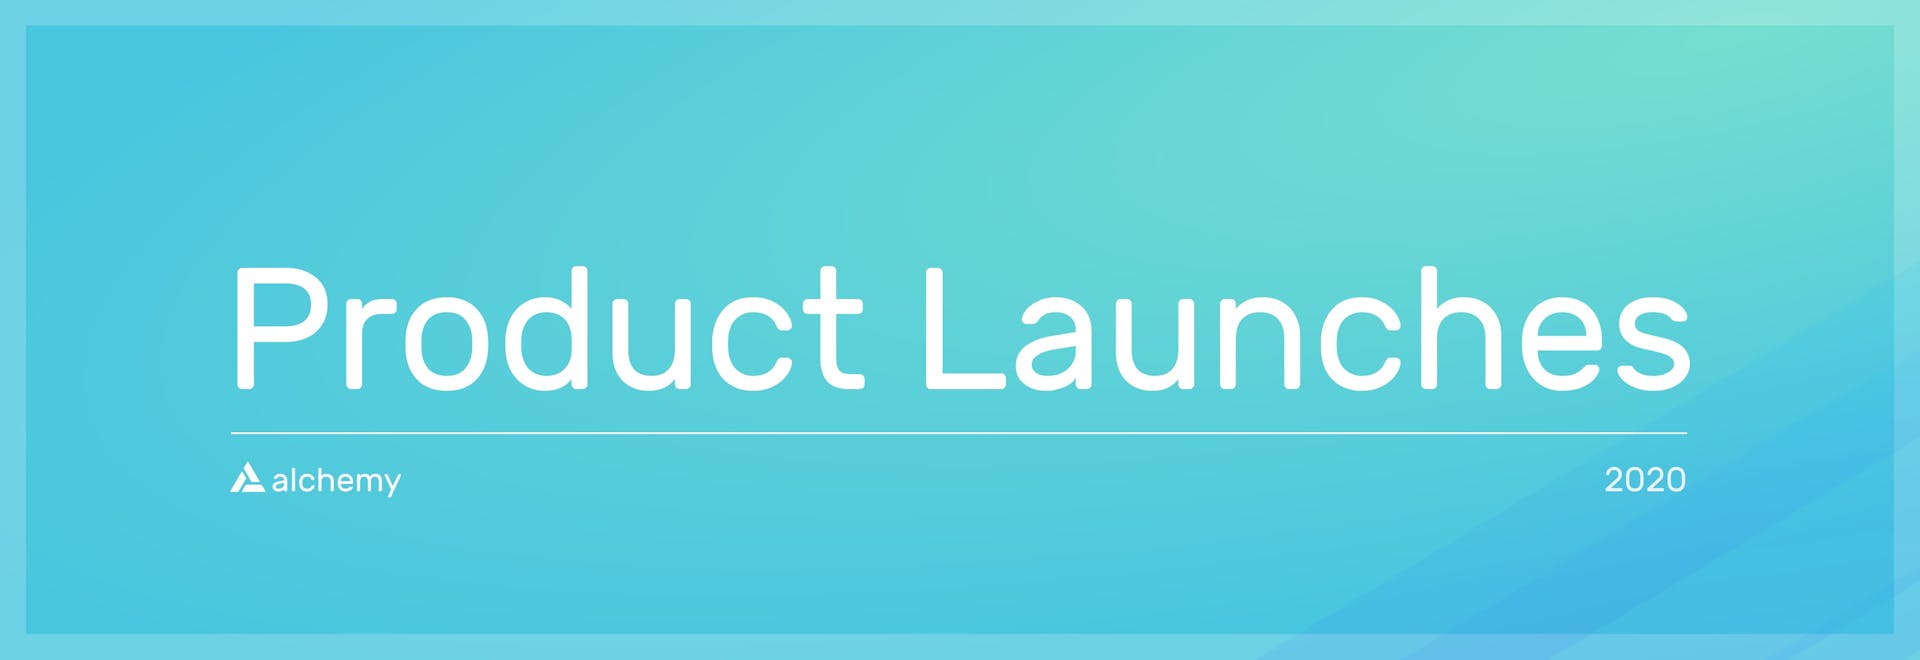 Product launches 2020